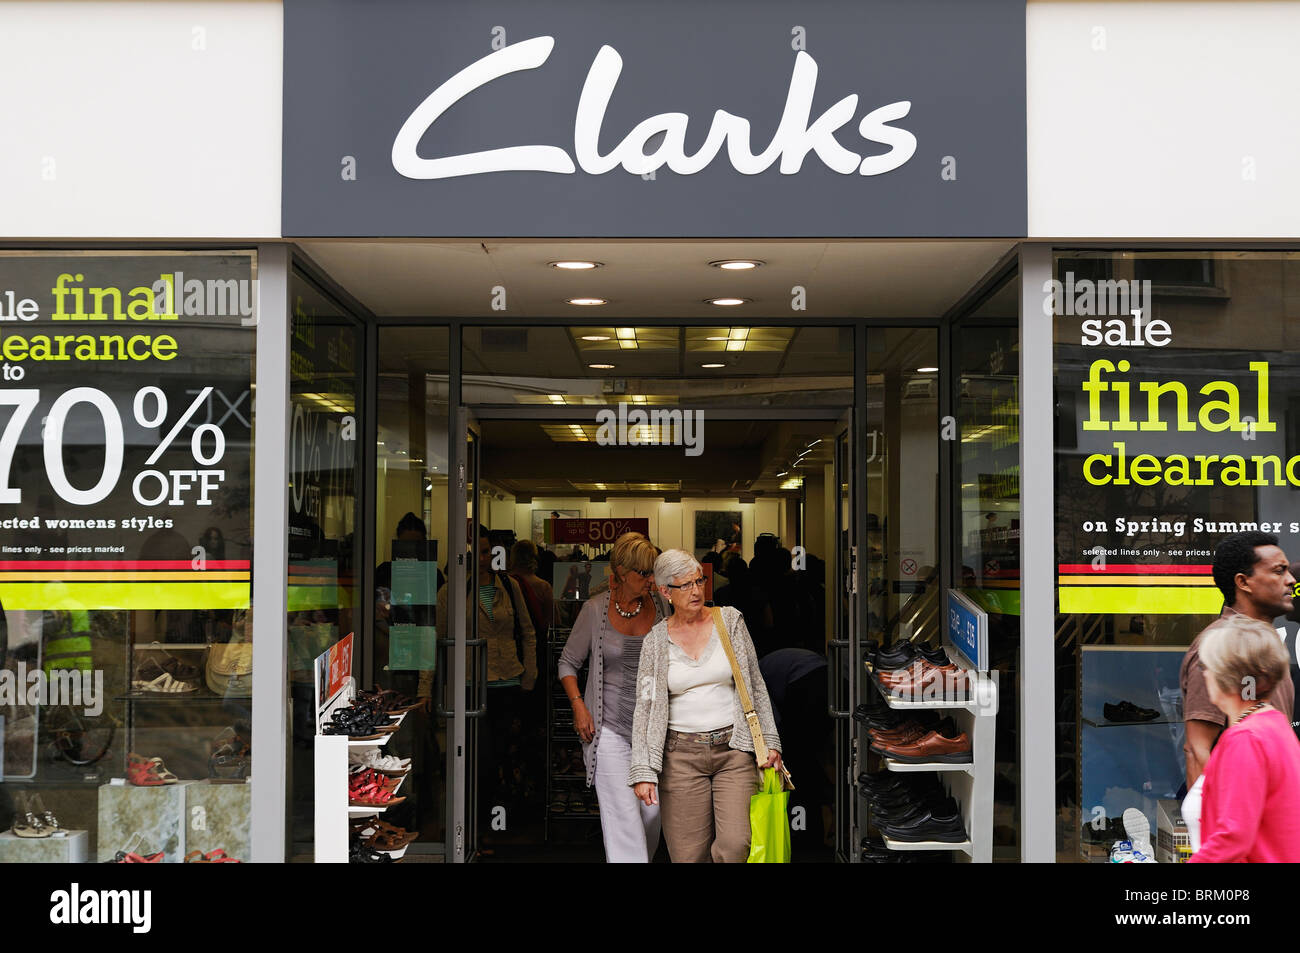 clarks shoes store uk